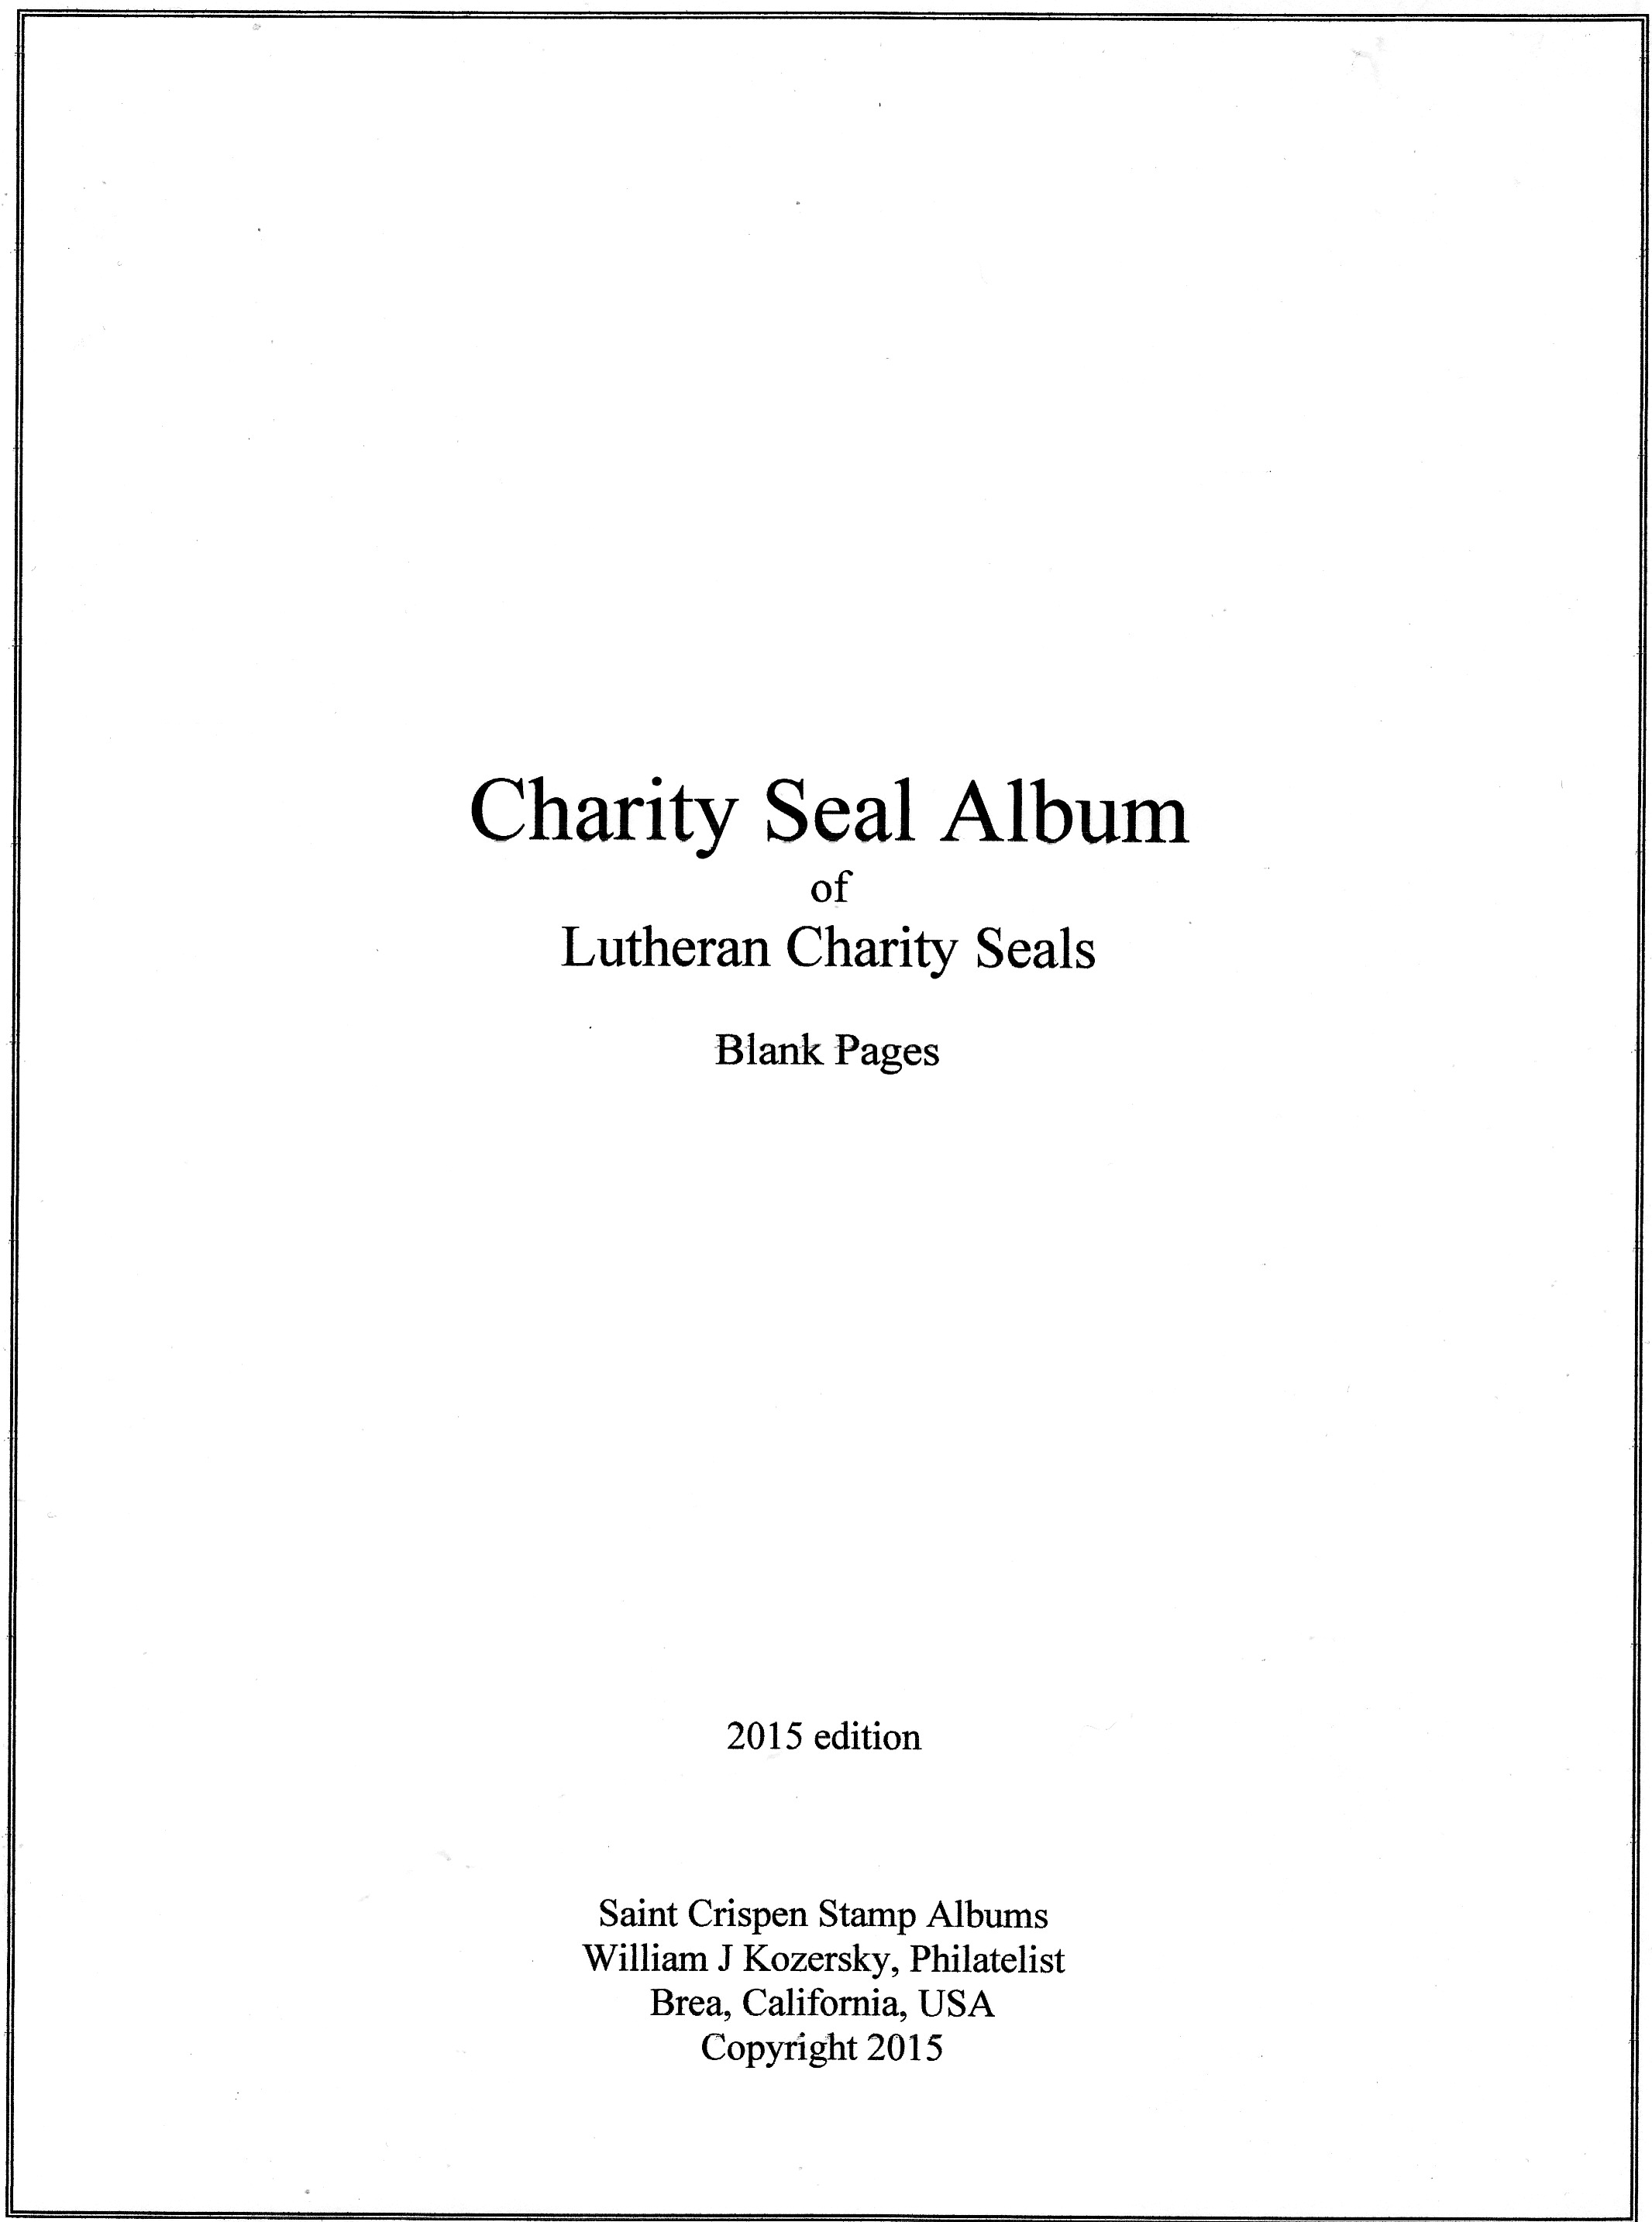 Lutheran Charity Seal Album Pages, blank pages with title and border